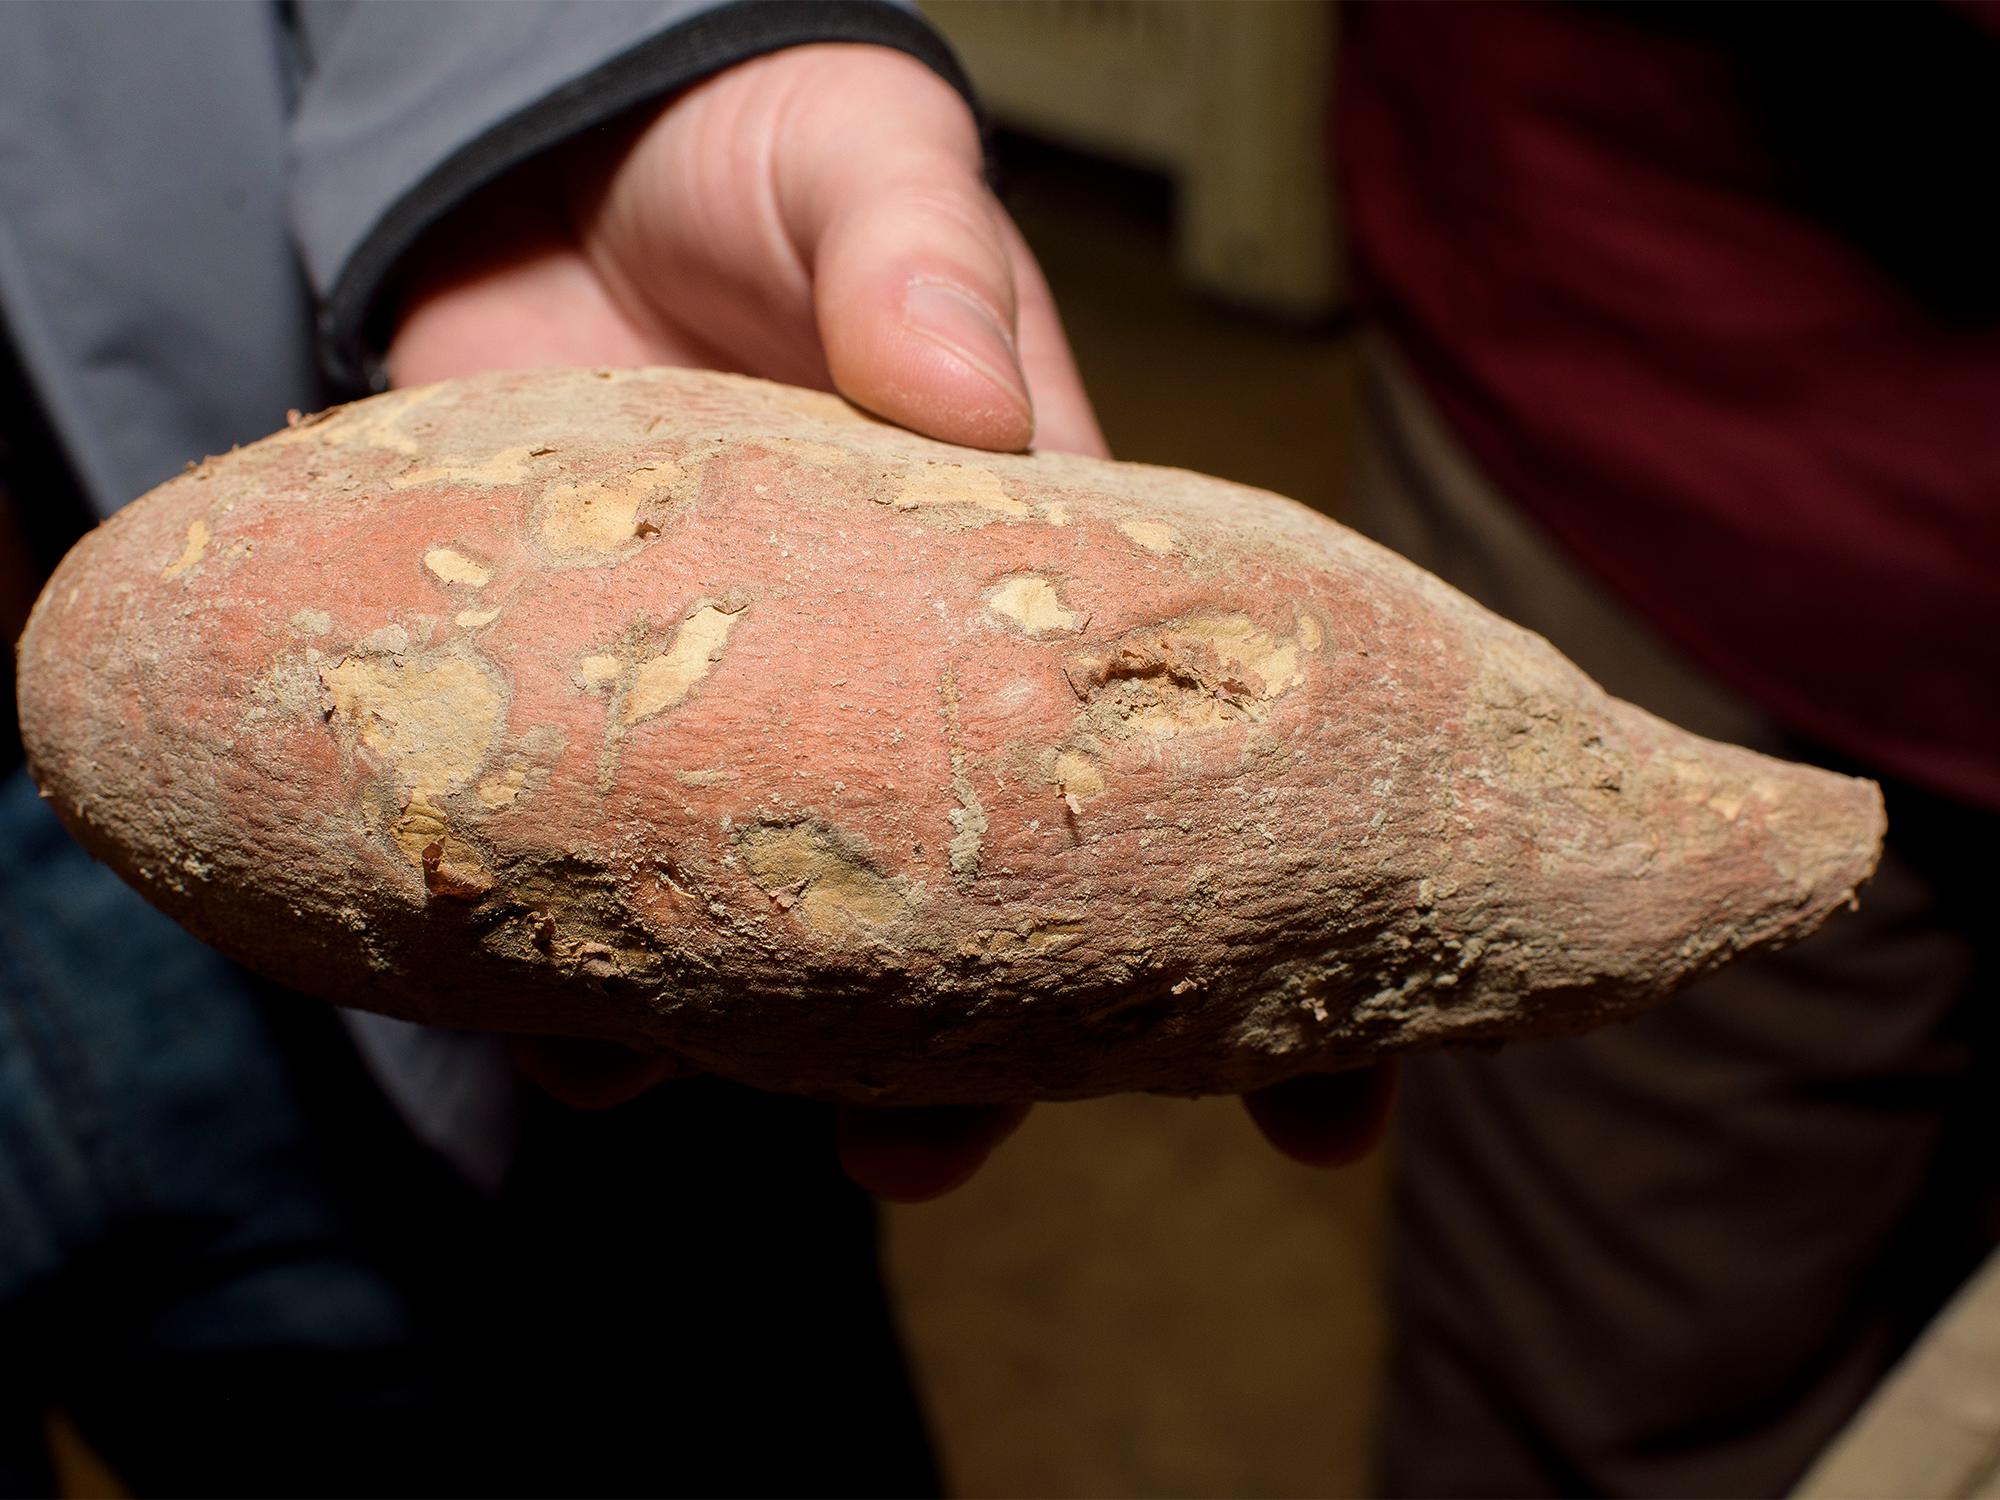 A sweet potato with a pink and brown outer surface is shown close up.